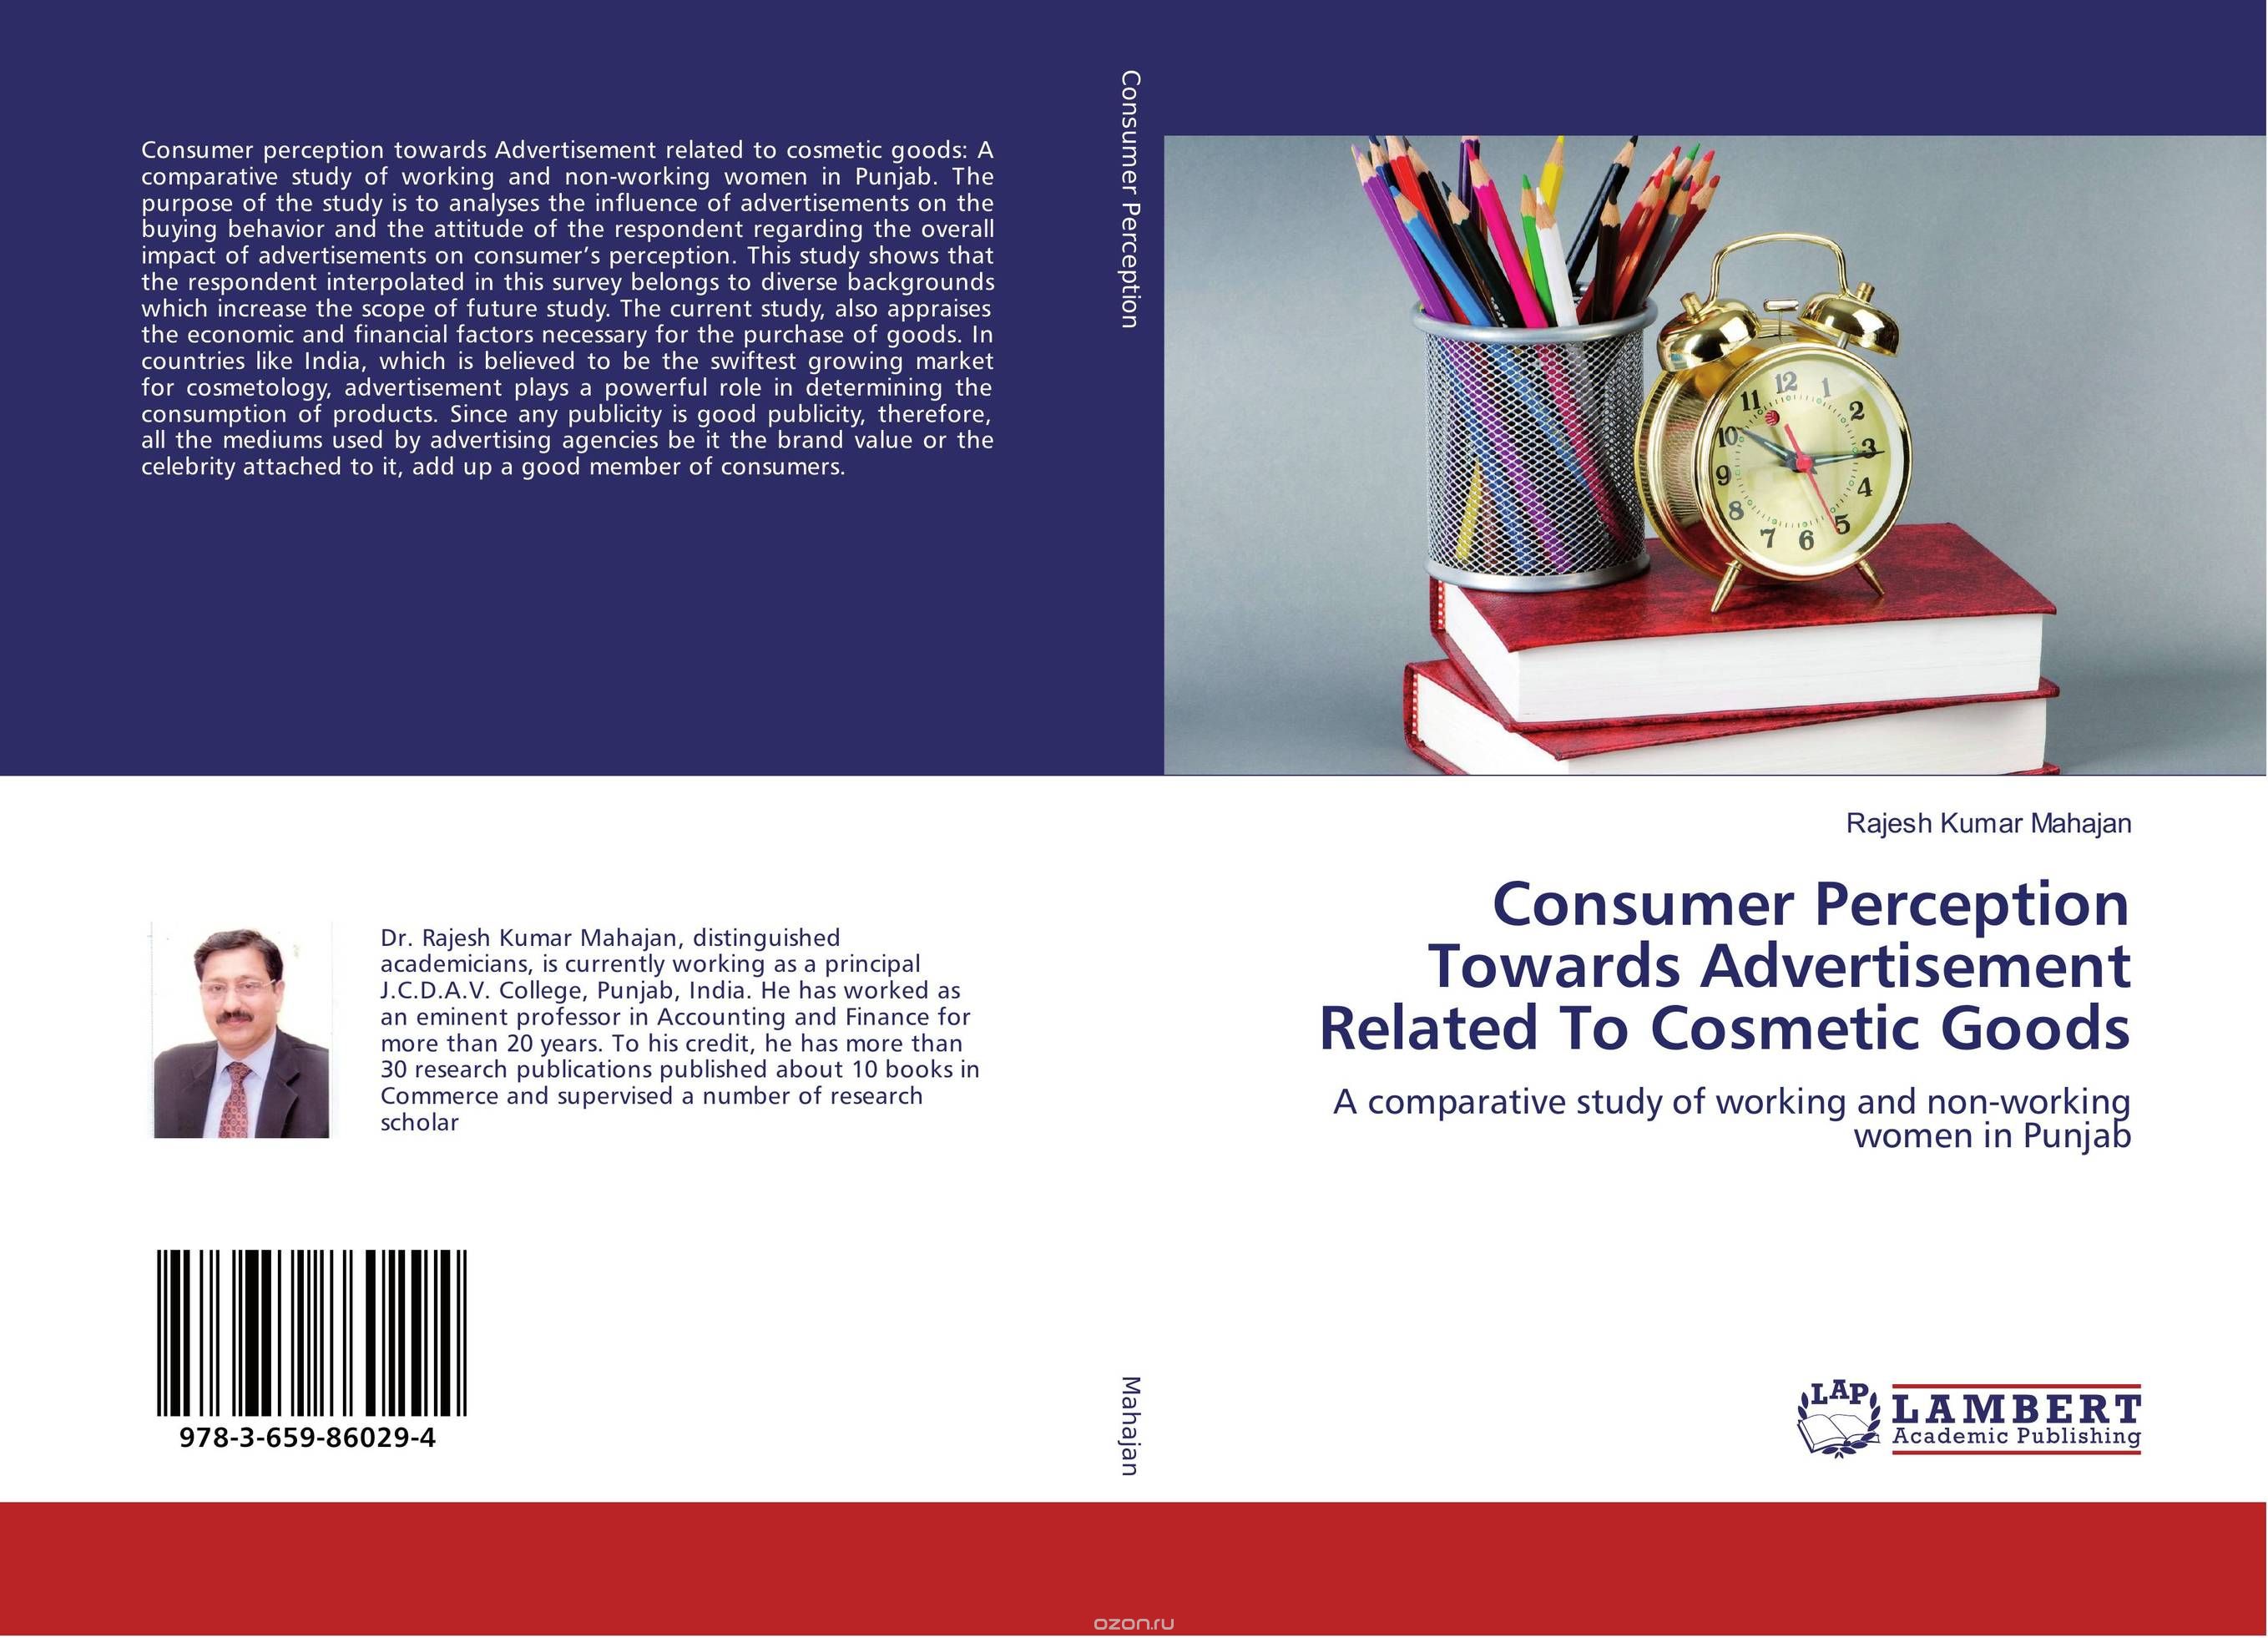 Consumer Perception Towards Advertisement Related To Cosmetic Goods